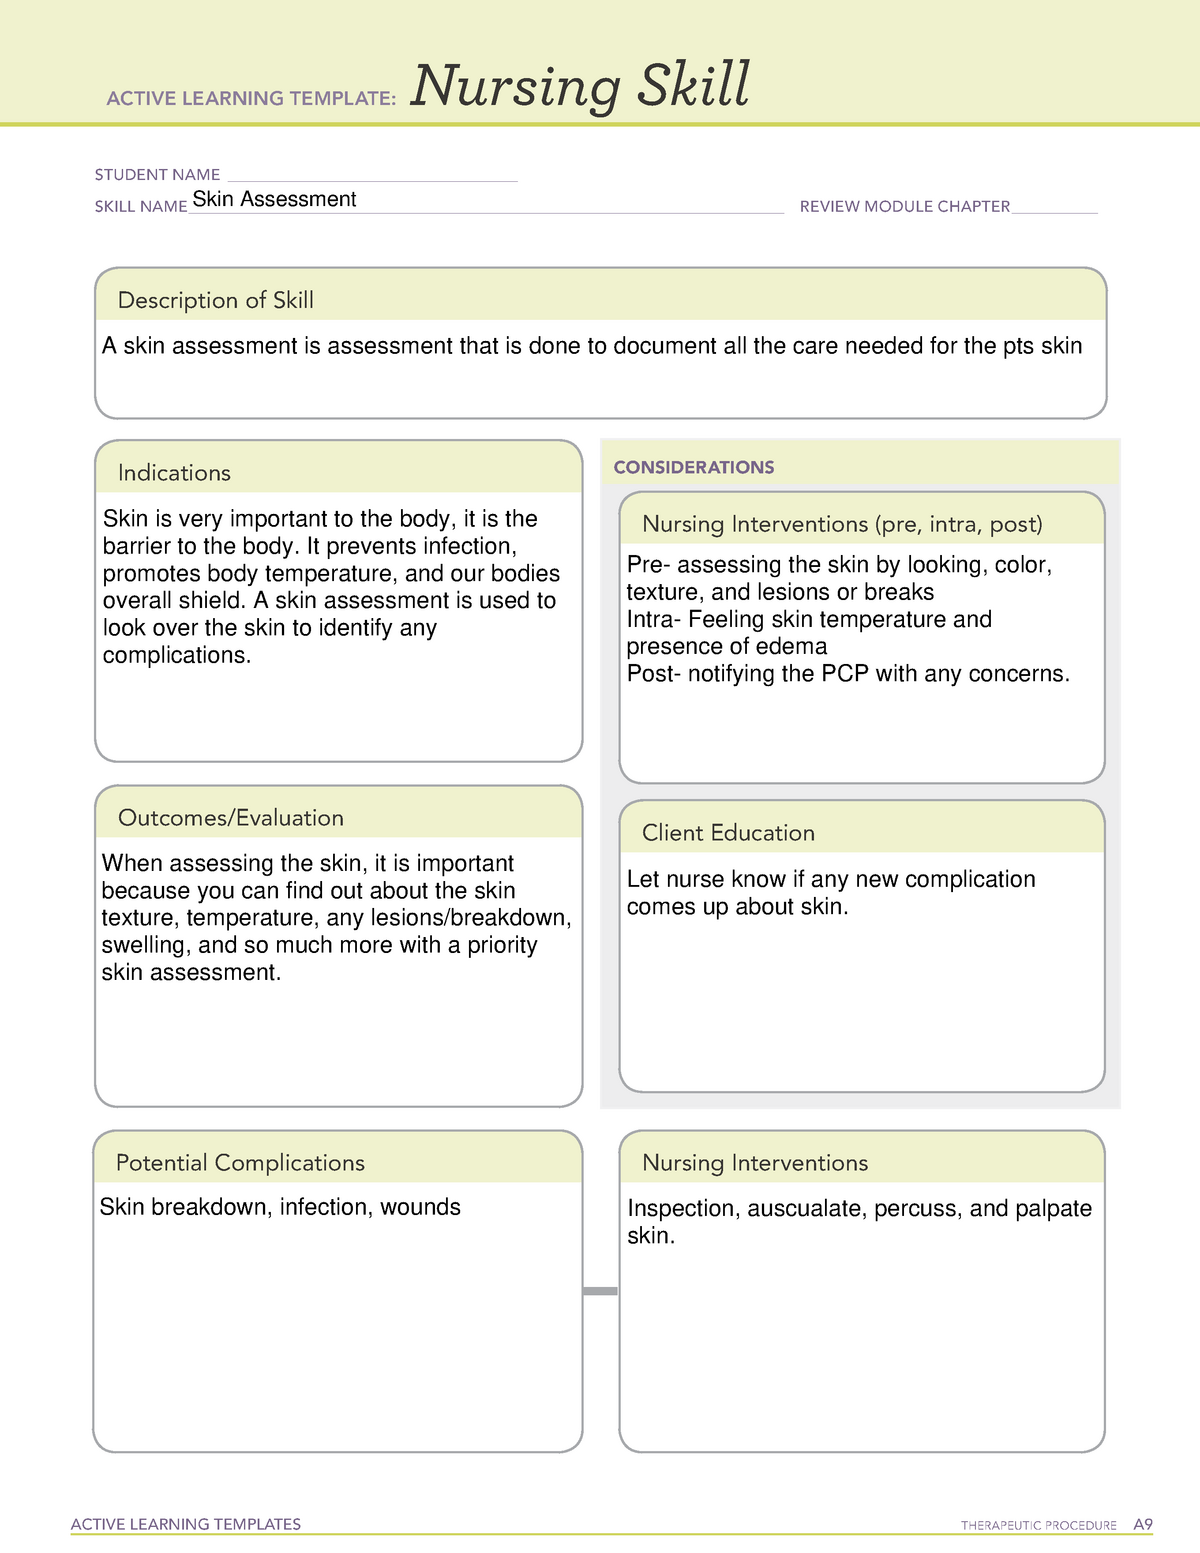 Skill Skin Assessment - ATI - ACTIVE LEARNING TEMPLATES THERAPEUTIC ...